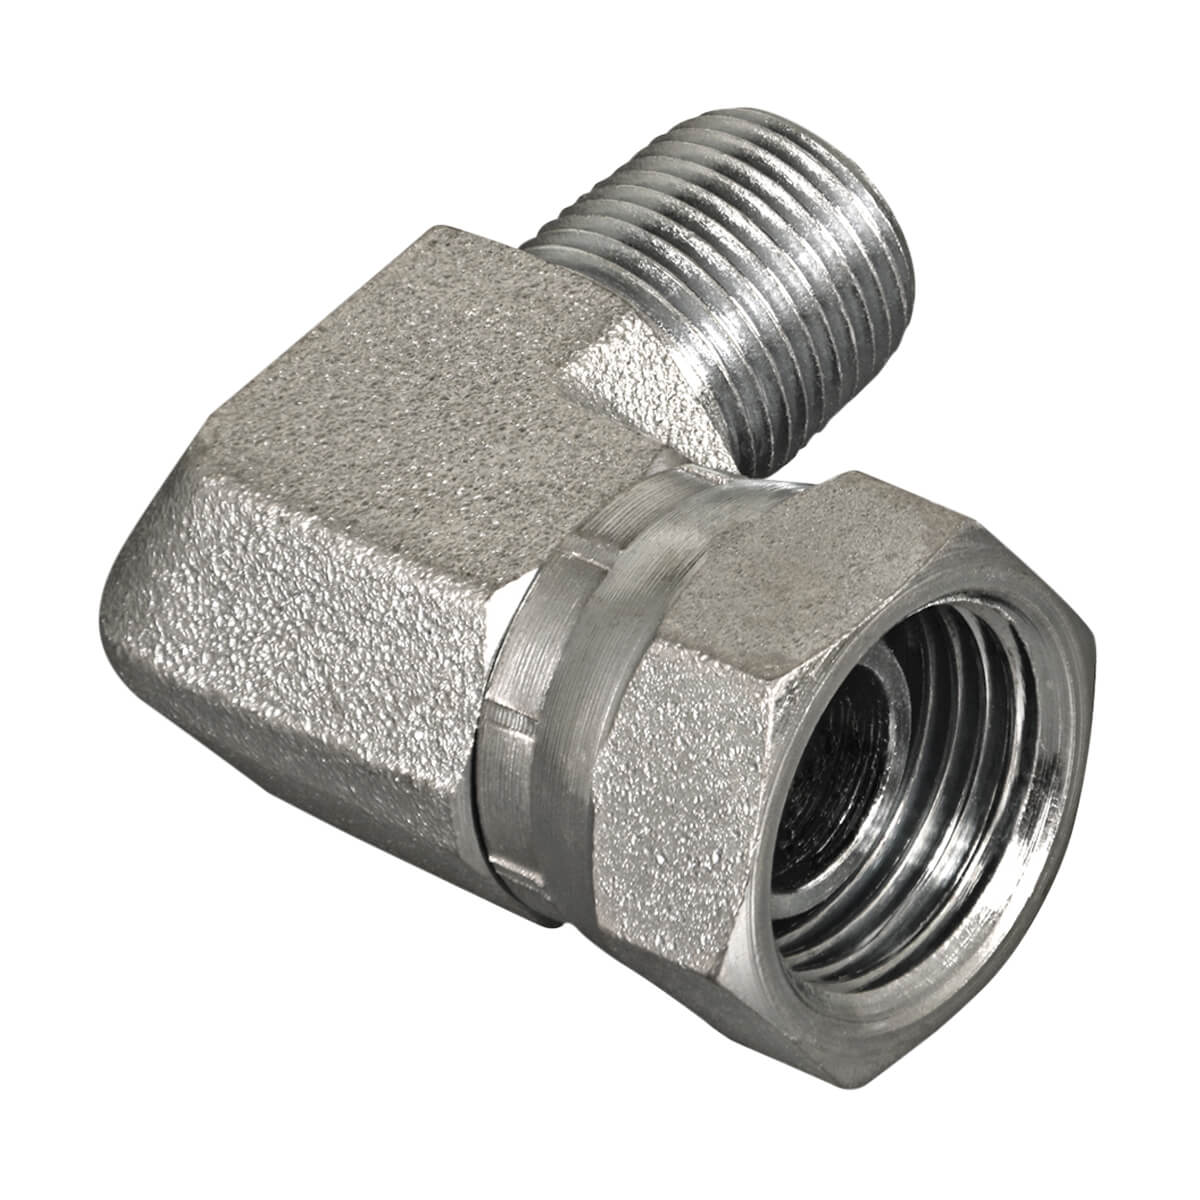 Swivel Hydraulic Adapter - 3/8-in MPT x 1/2-in FPT 90 Degree